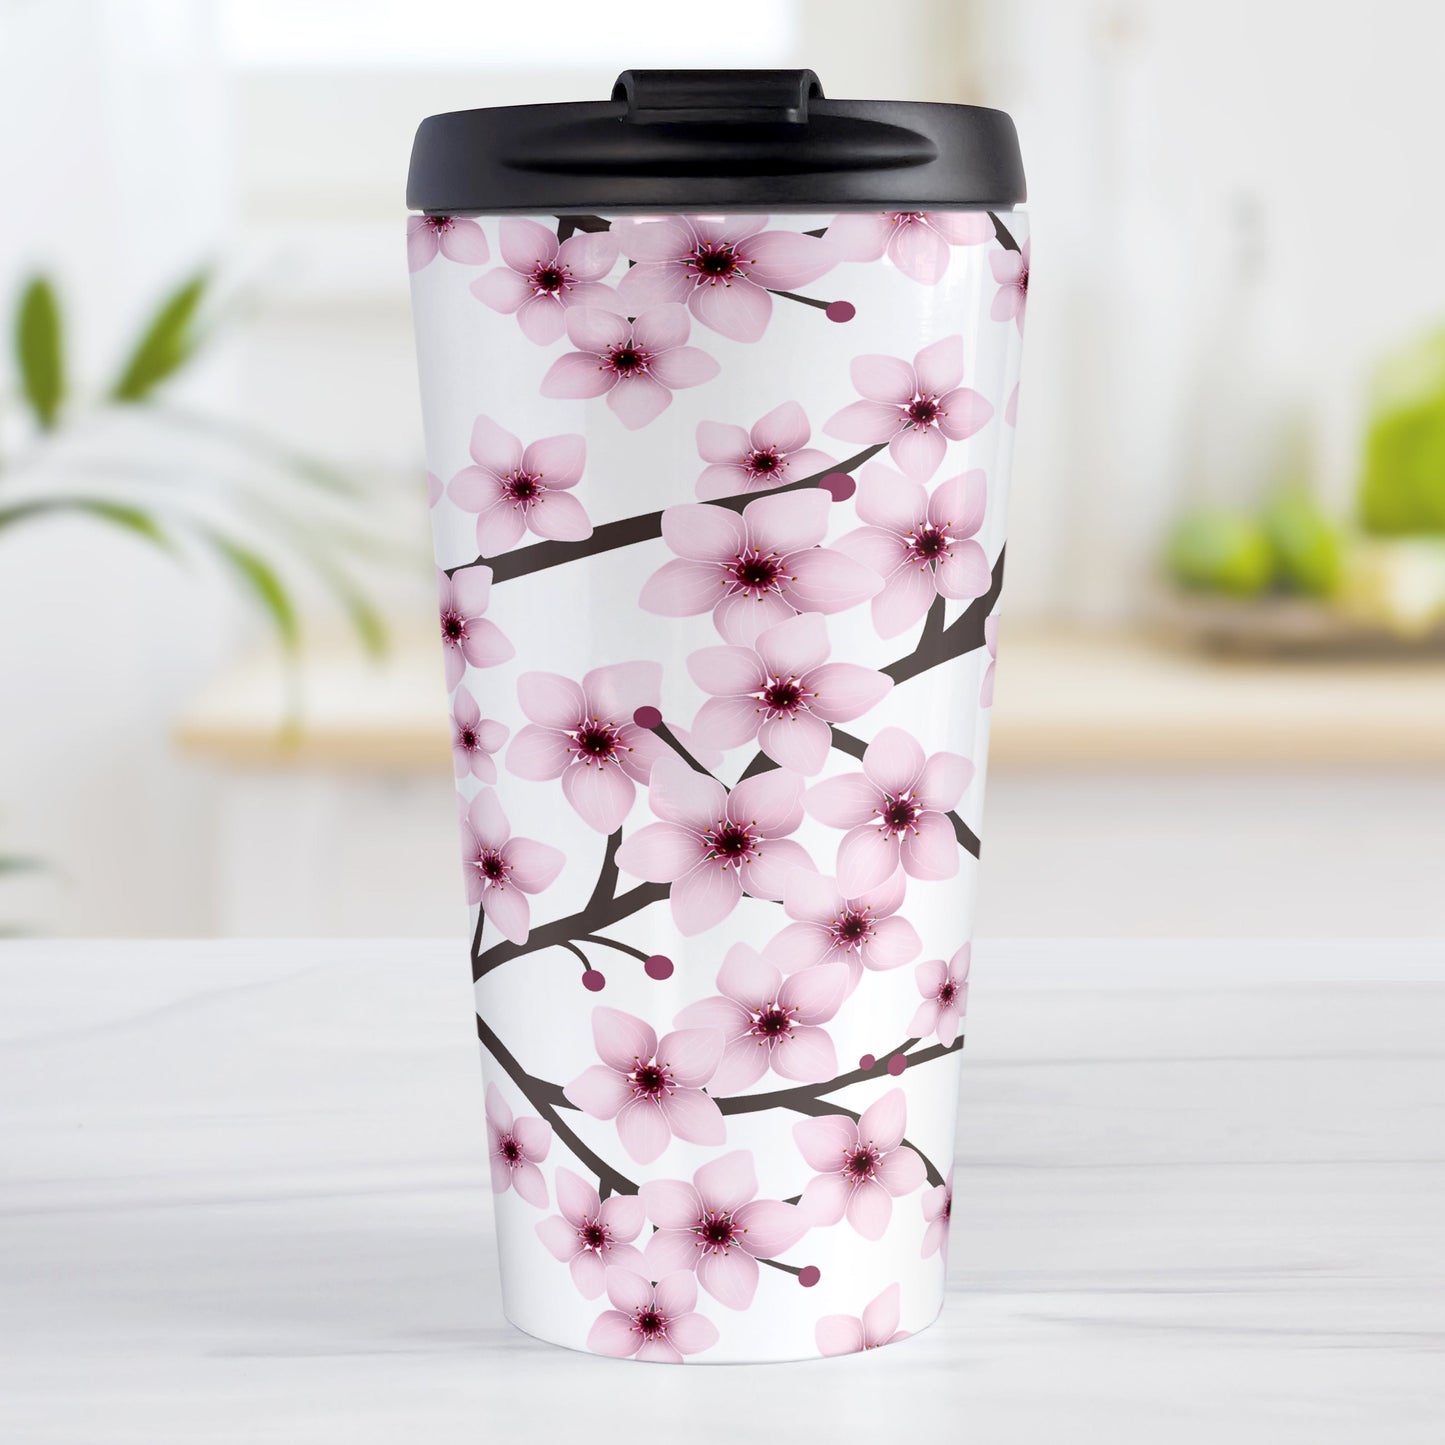 Cherry Blossom Travel Mug (15oz) at Amy's Coffee Mugs. A stainless steel insulated travel mug designed with a pattern of pink cherry blossom flowers on branches that wraps around the travel mug. 